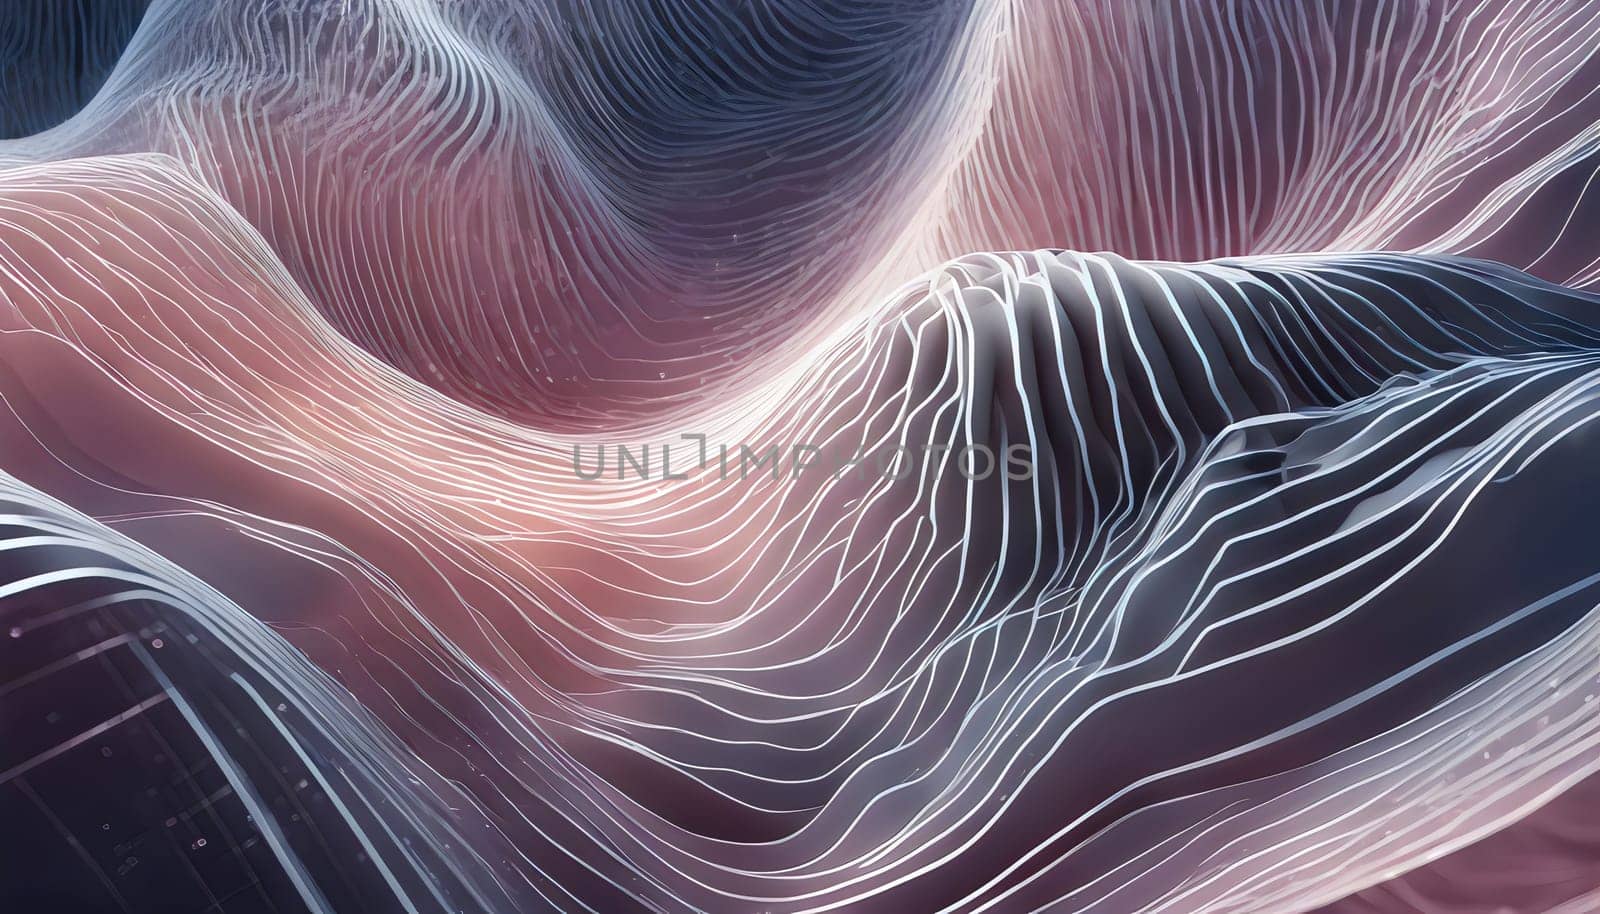 Abstract Digital Landscape of Flowing Lines and Waves Created by artificial intelligence